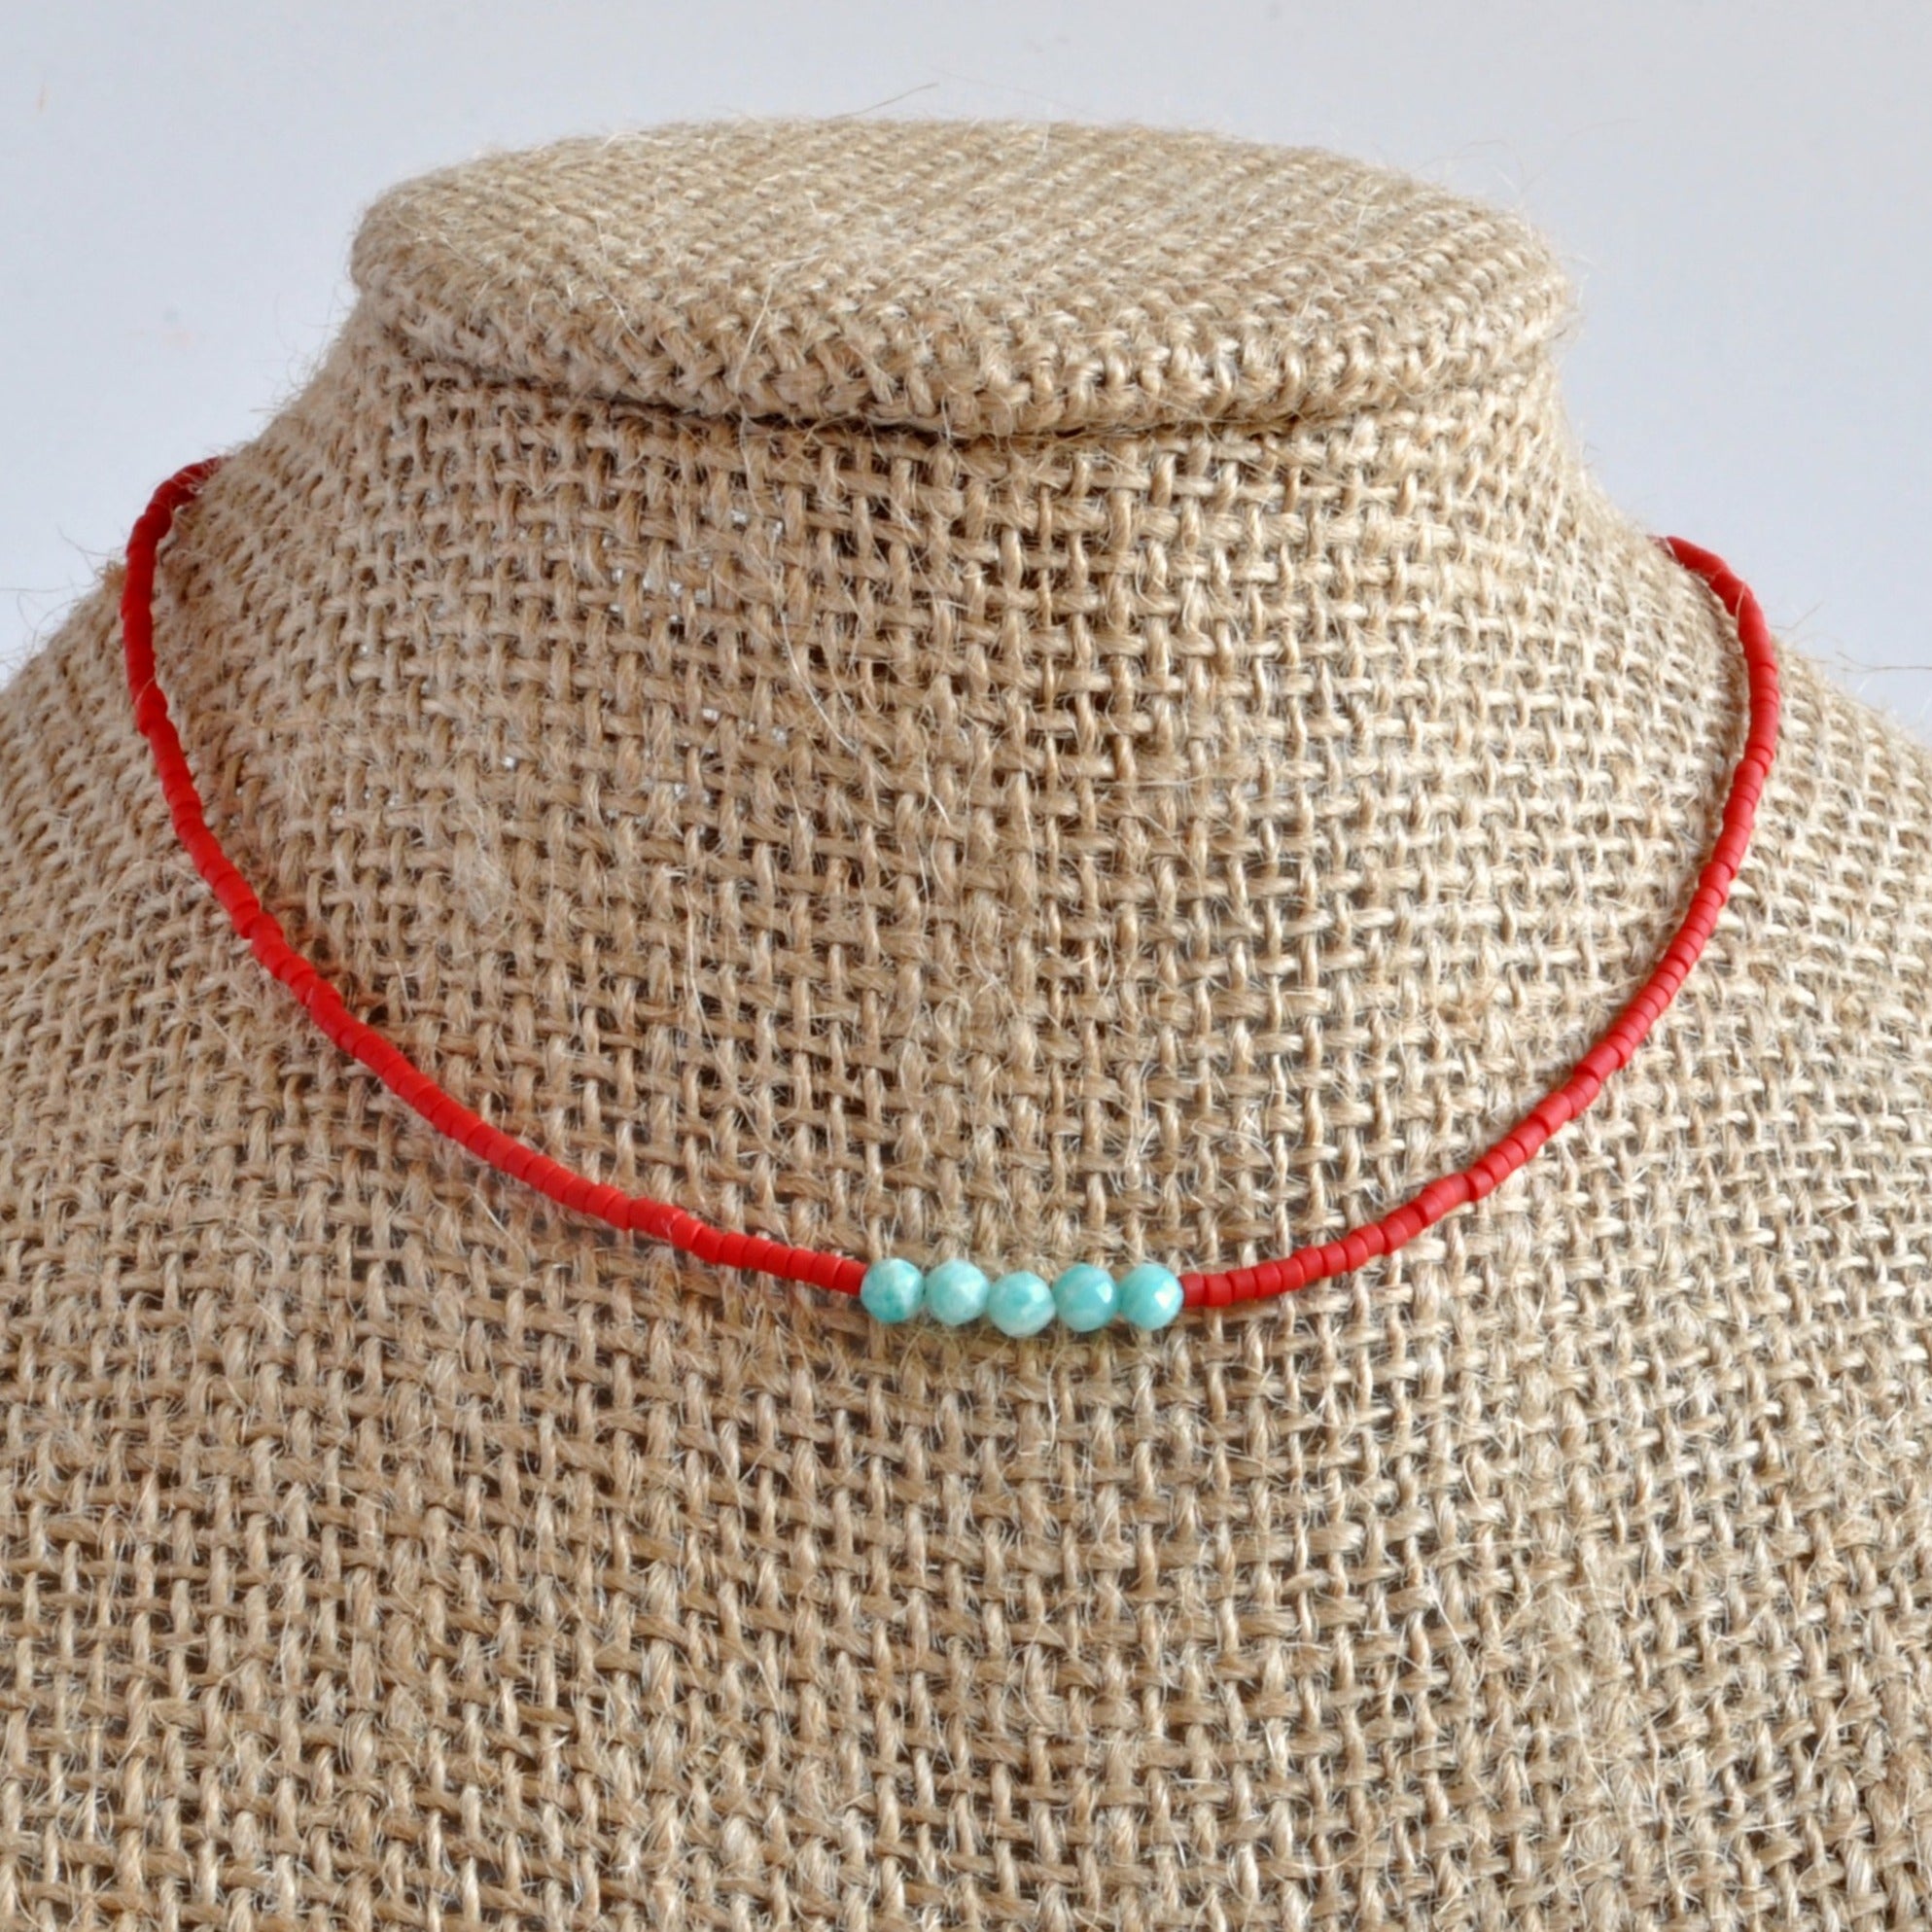 Libby & Smee matte red beaded choker necklace with turquoise Amazonite accent beads on mannequin 